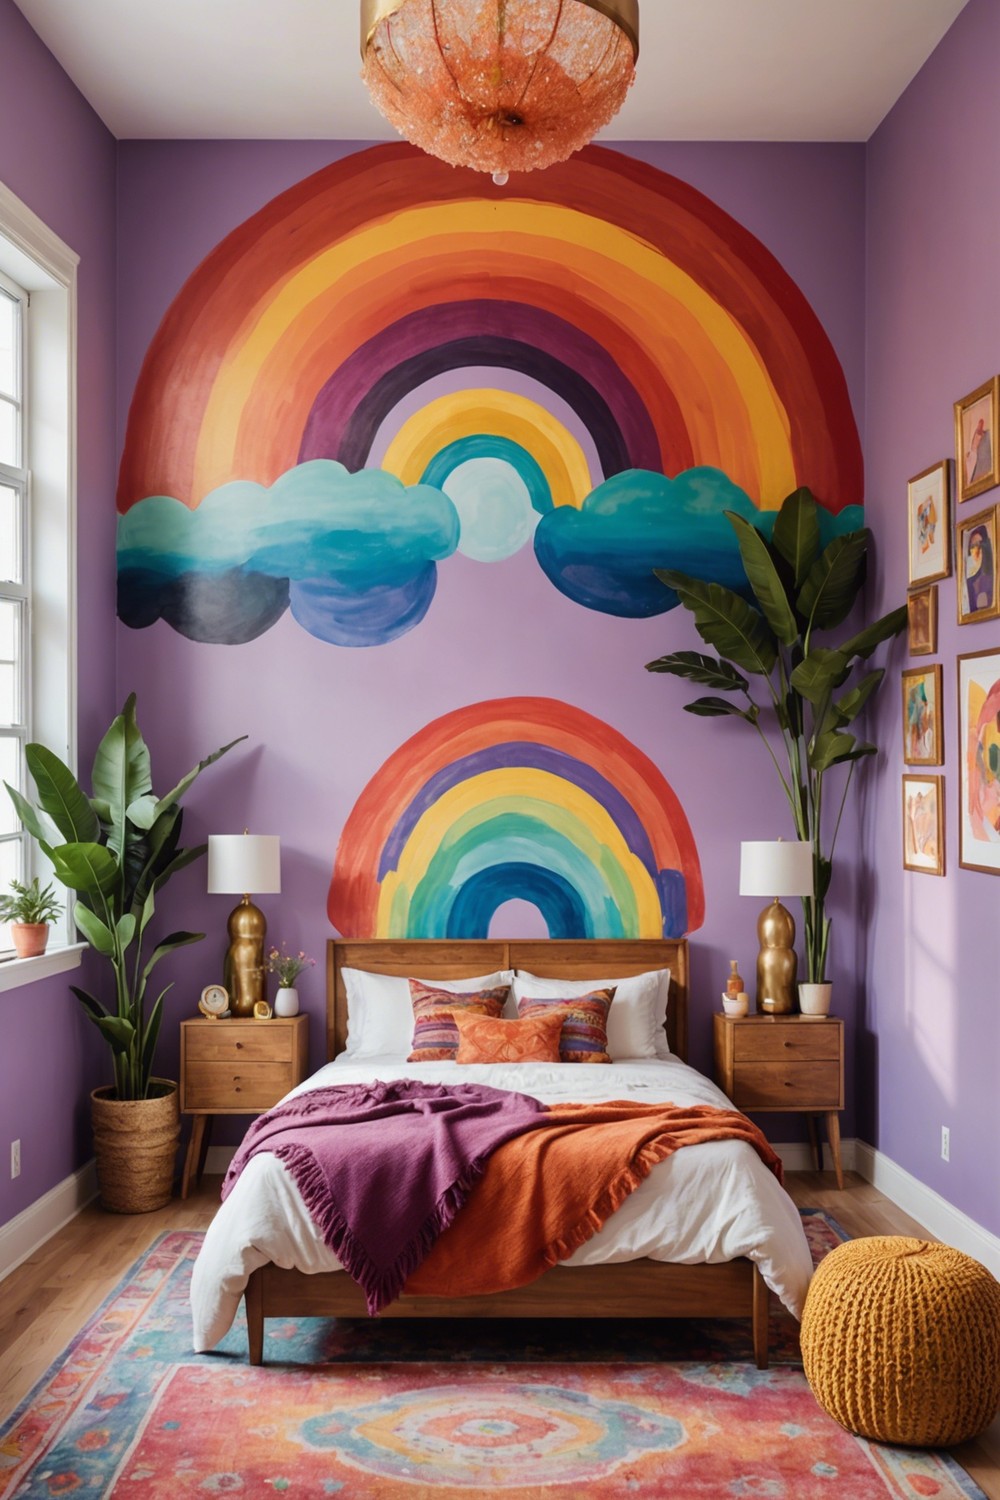 Hand-Painted Rainbow Mural on Walls